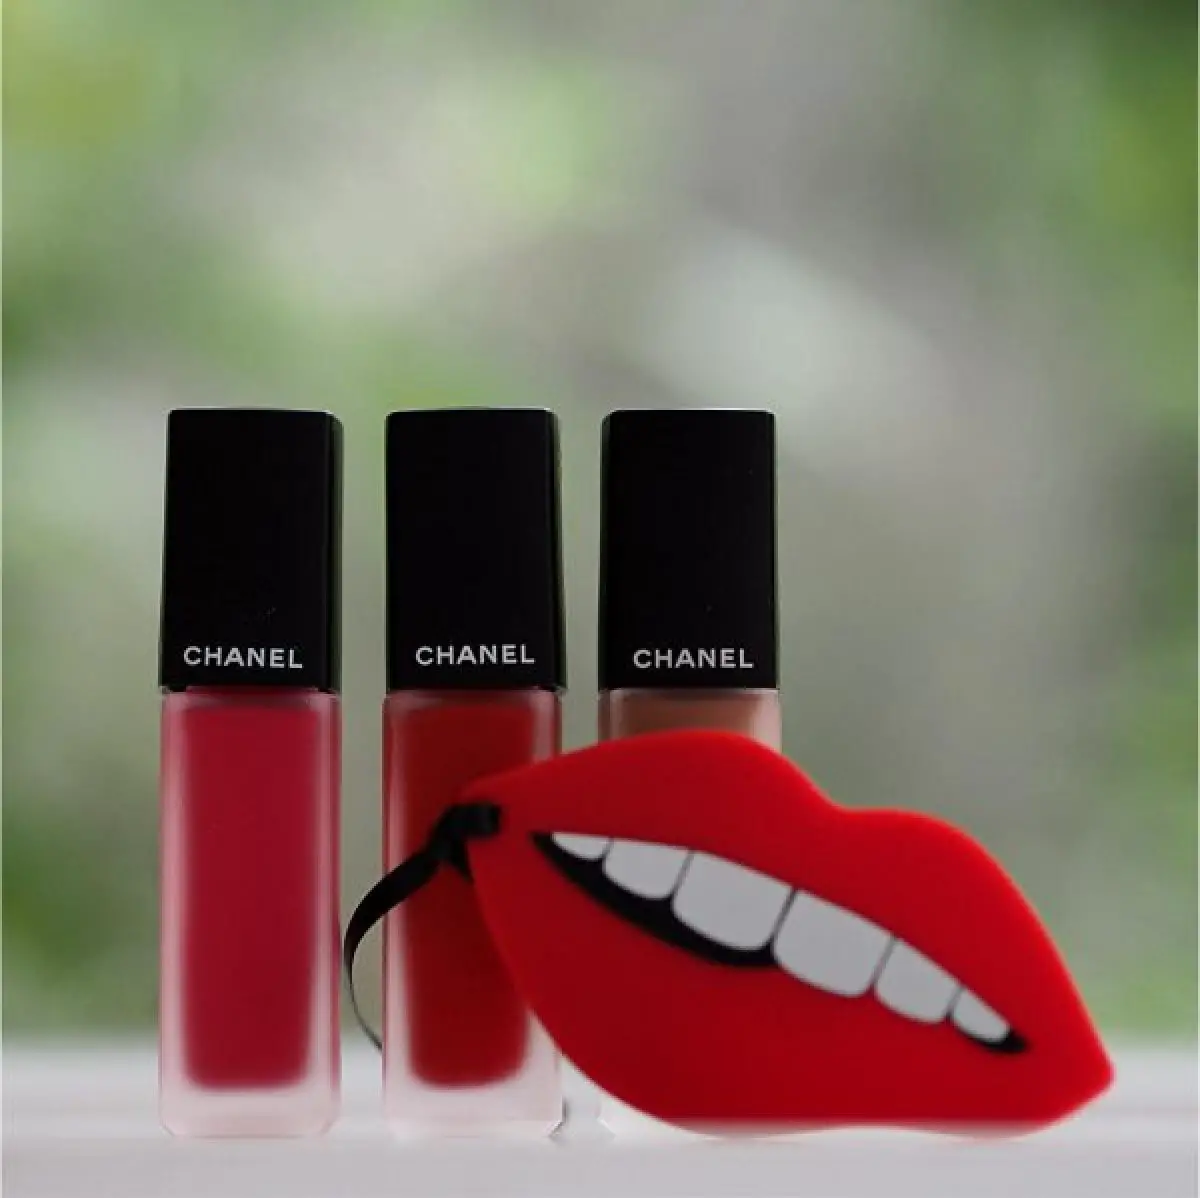 New Shades Chanel Rouge Allure Laque and Ink Fusion - The Beauty